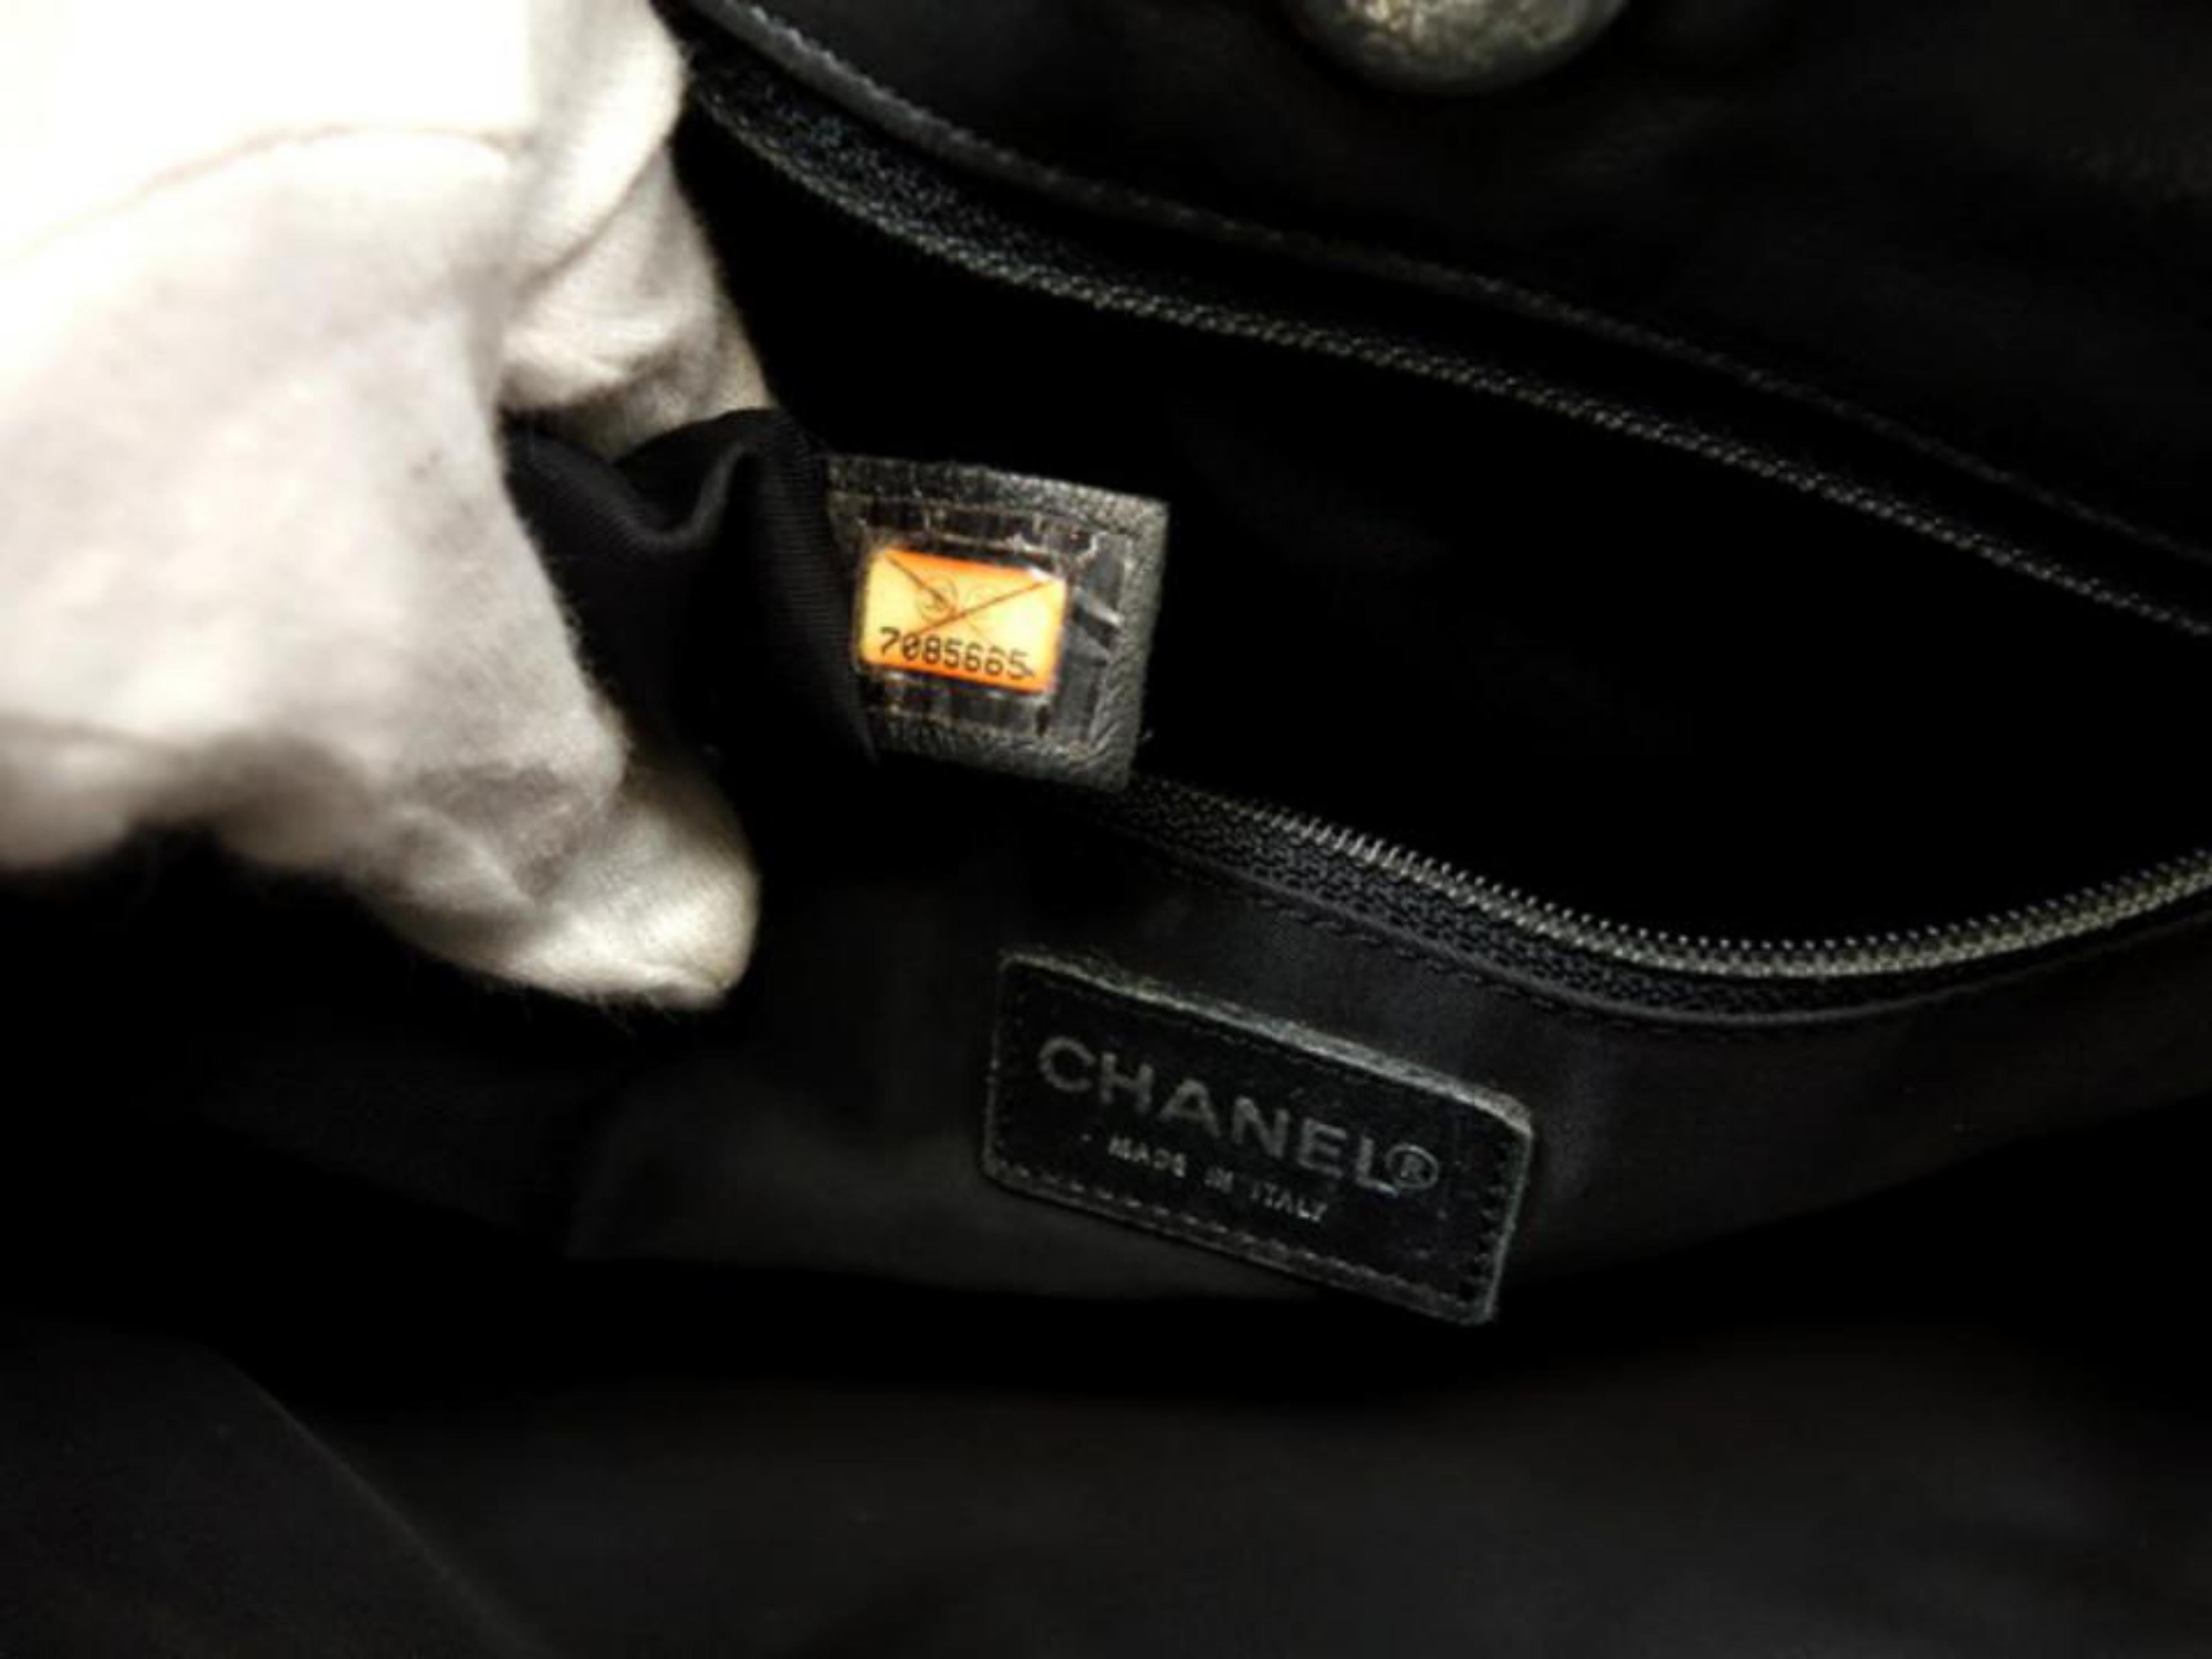 Chanel 5 Star Chain Tote 227481 Black Leather Shoulder Bag In Good Condition For Sale In Forest Hills, NY